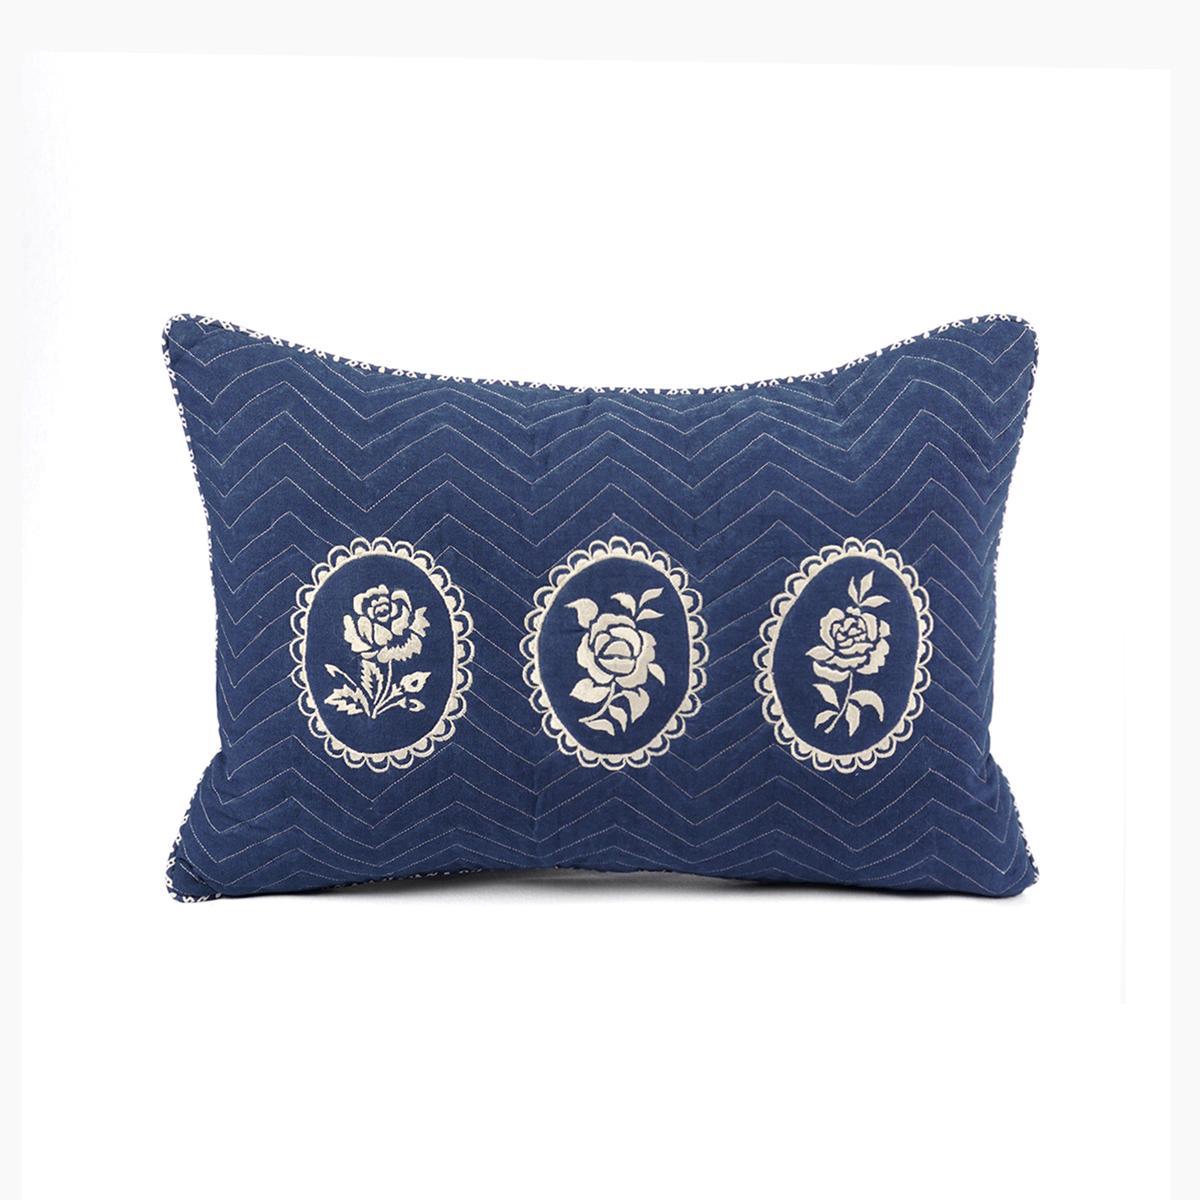 Indigo/dark blue DOMINOTERIE embroidered cotton pillow cover, sizes available